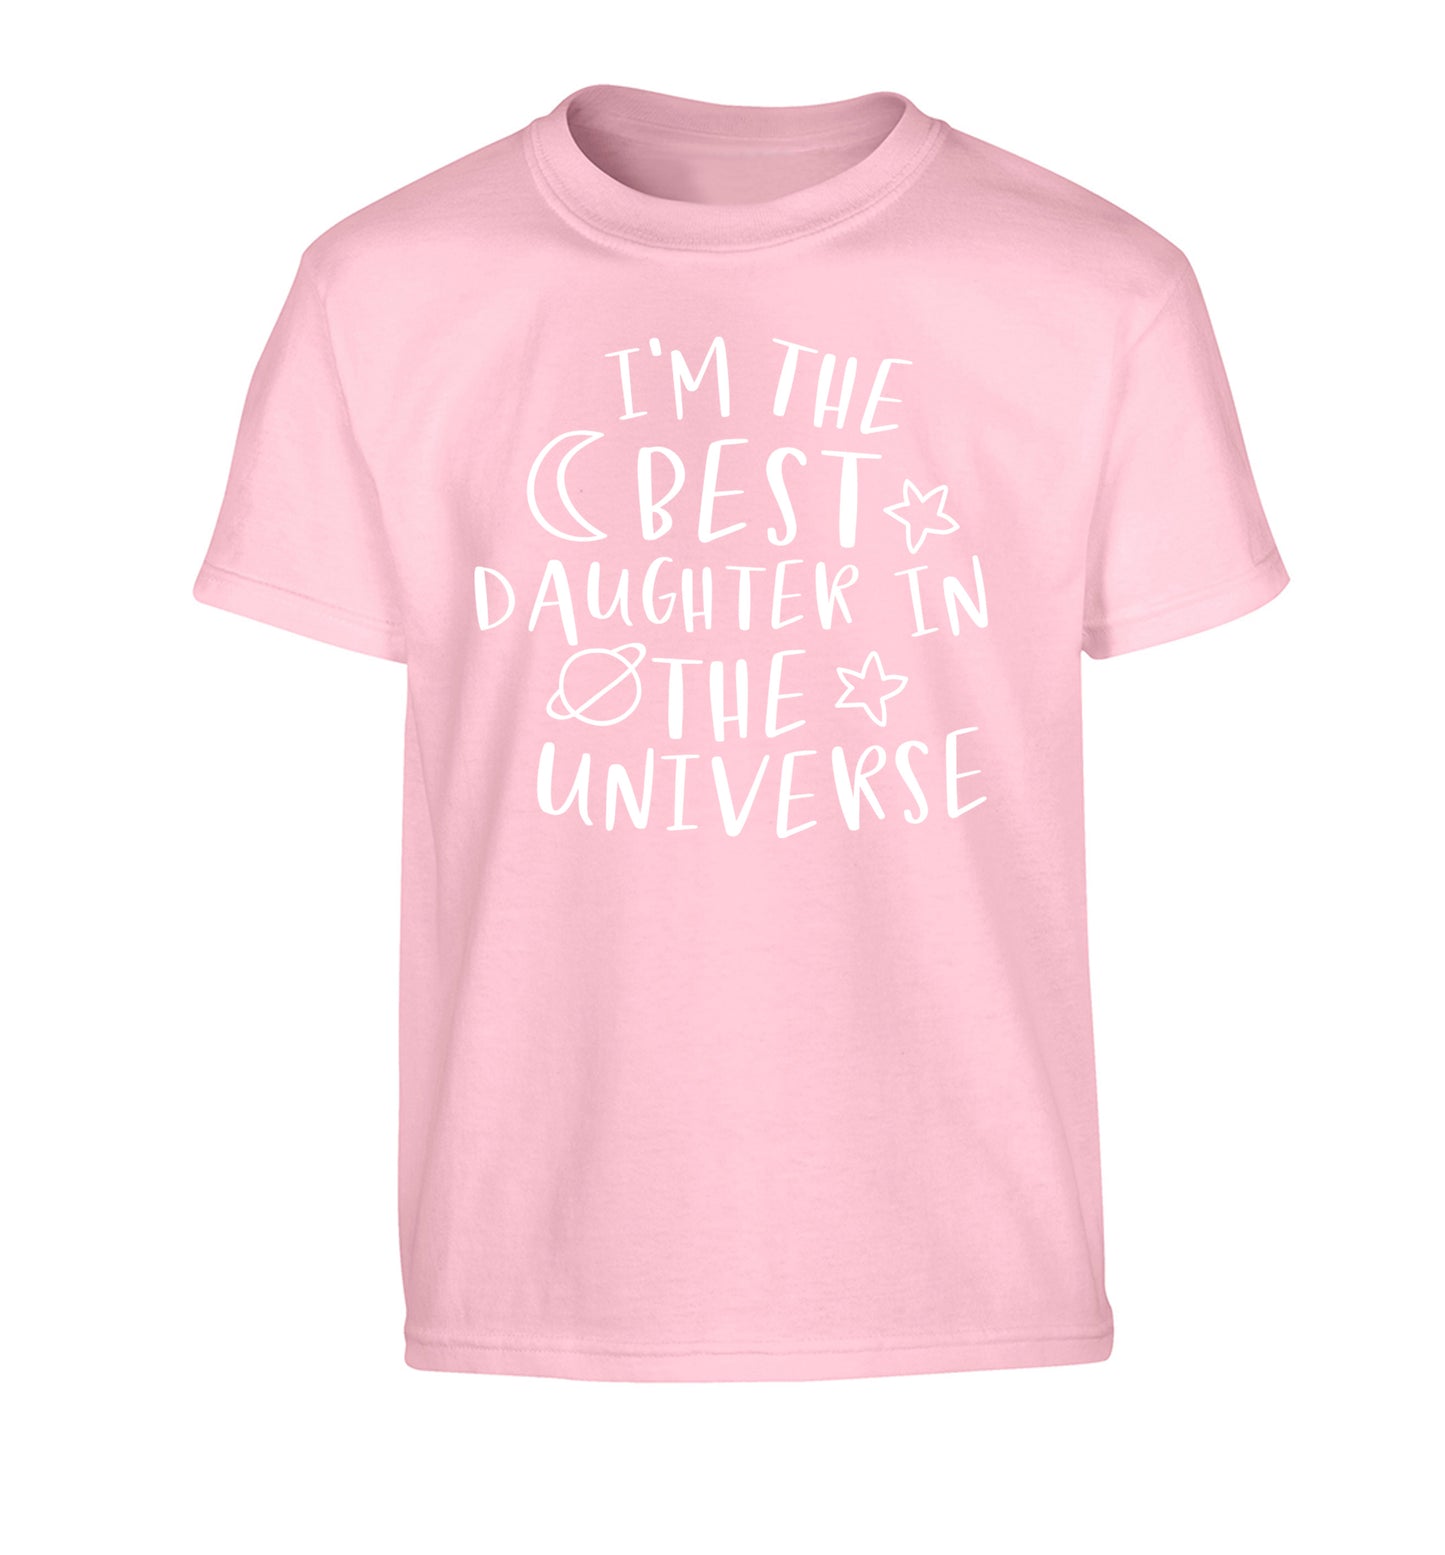 I'm the best daughter in the universe Children's light pink Tshirt 12-13 Years